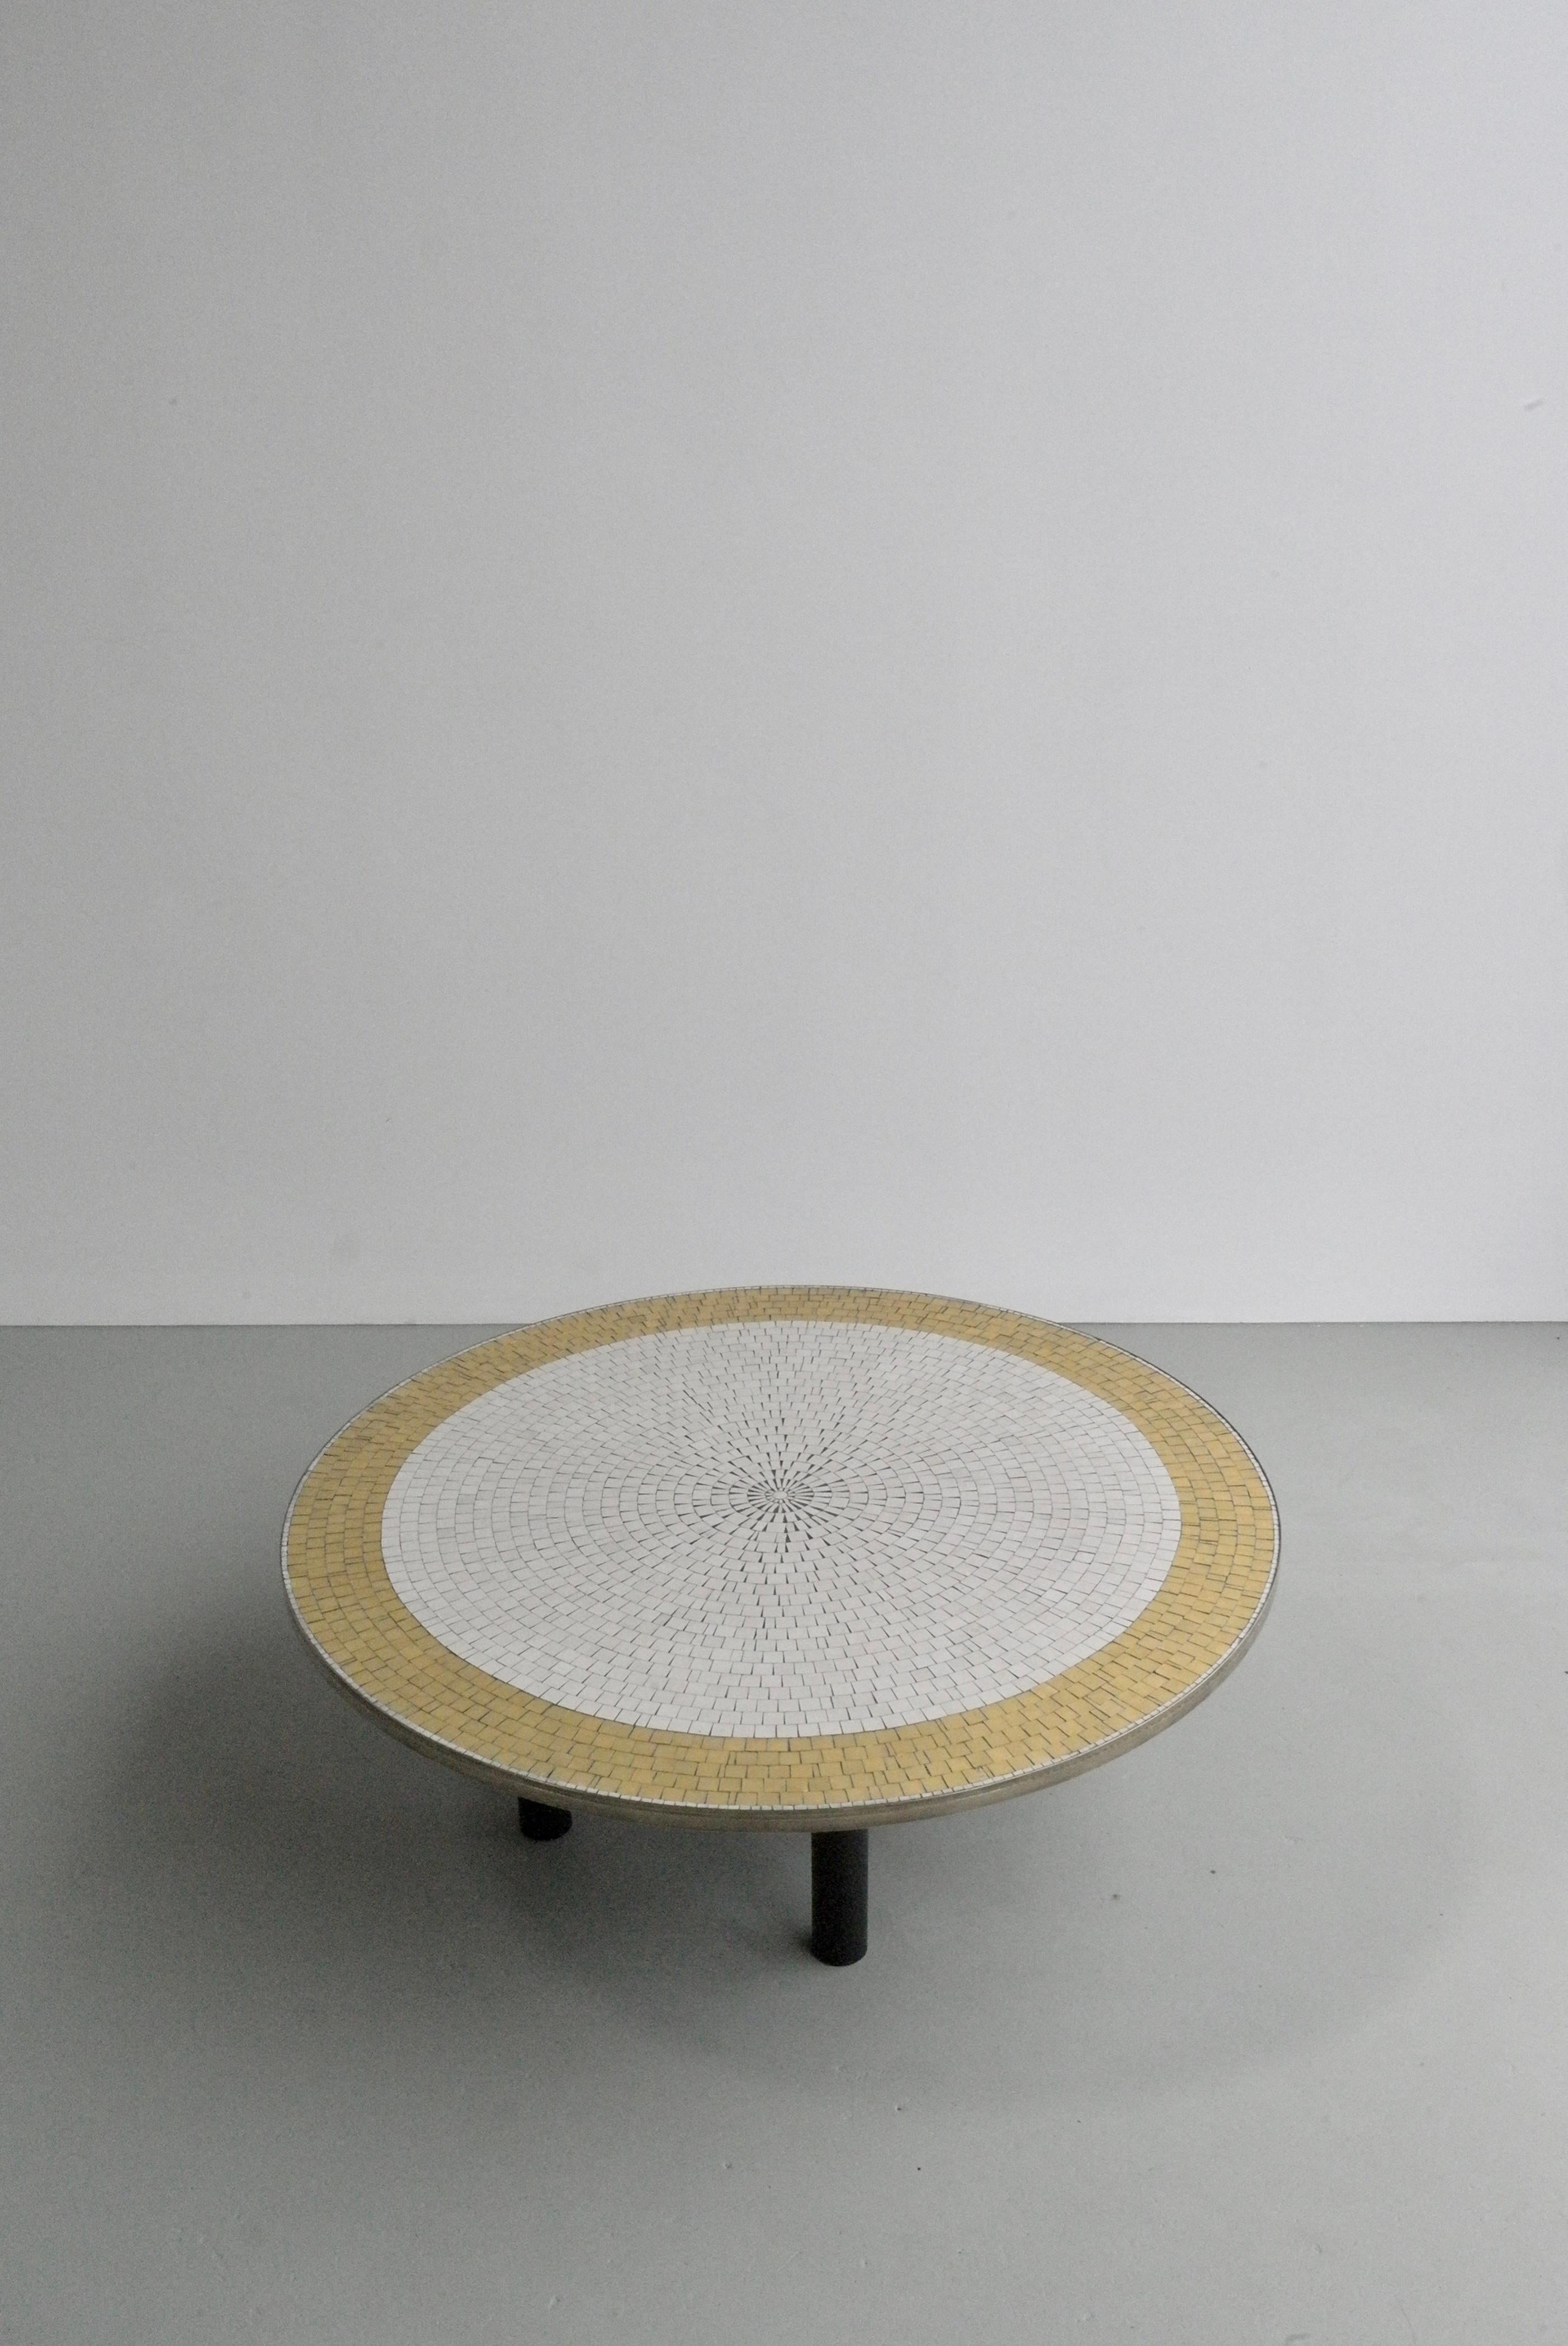  Berthold Müller Round Mosaic Gold and White Tile Coffee Table, 1960s 2